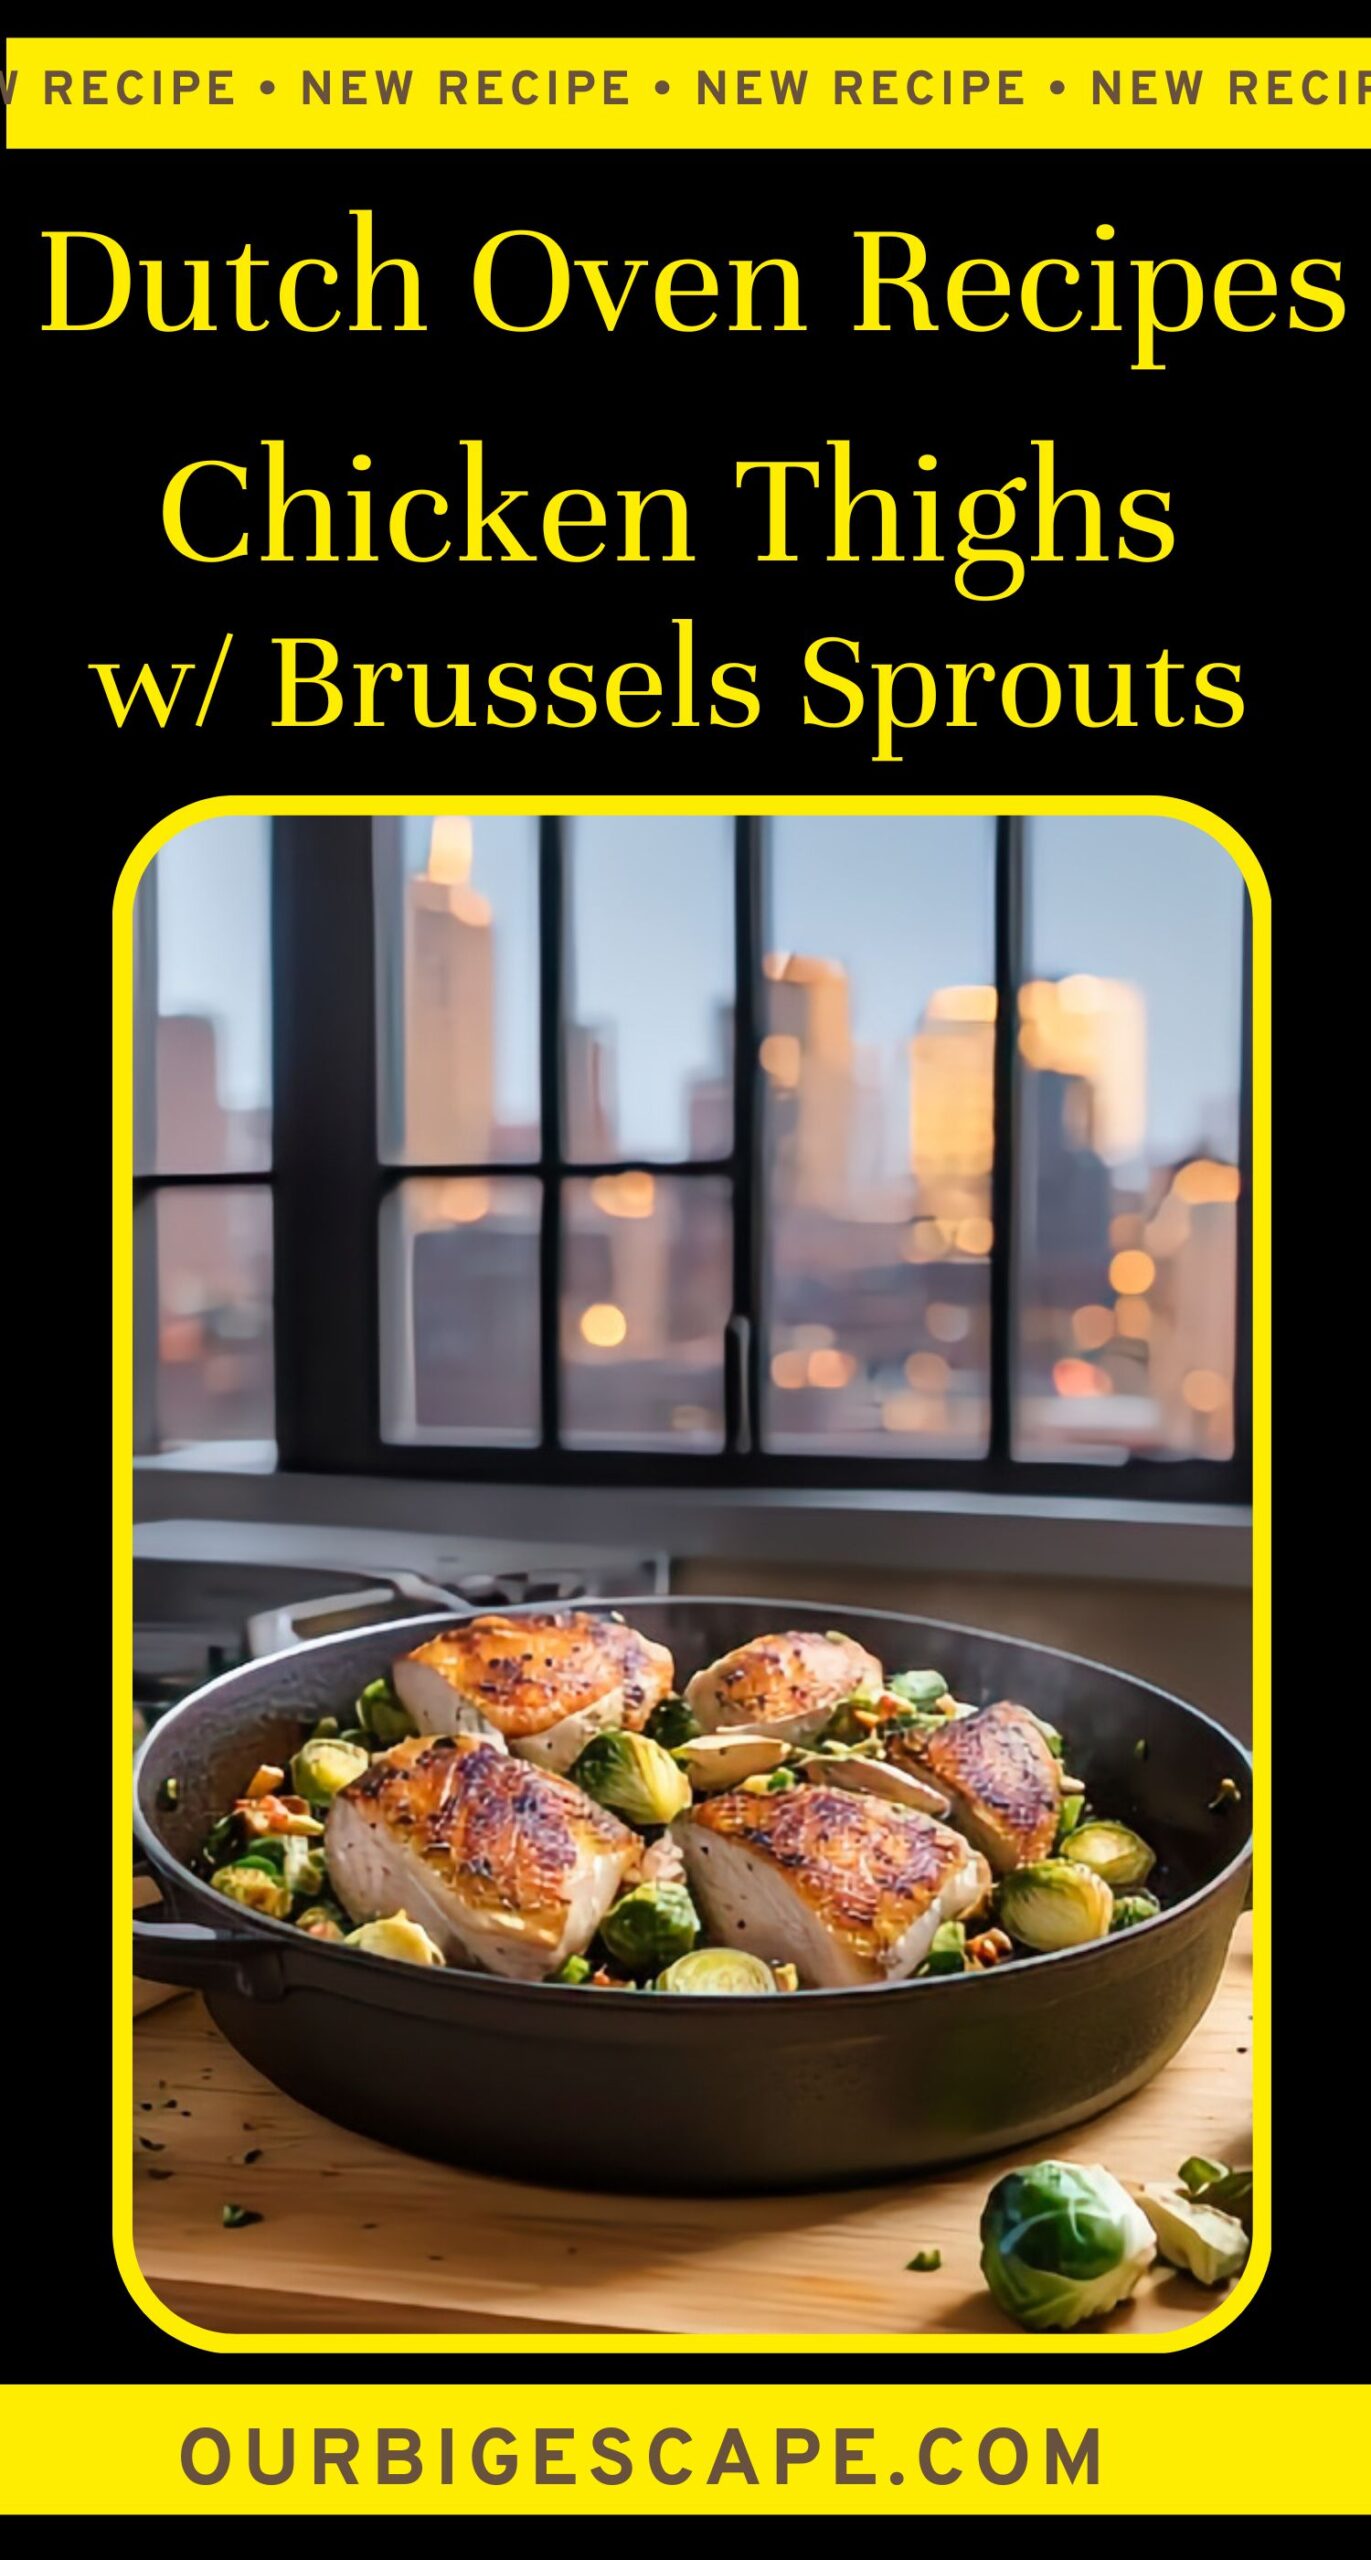 1. Dutch Oven Chicken Thighs with Brussels Sprouts Recipe